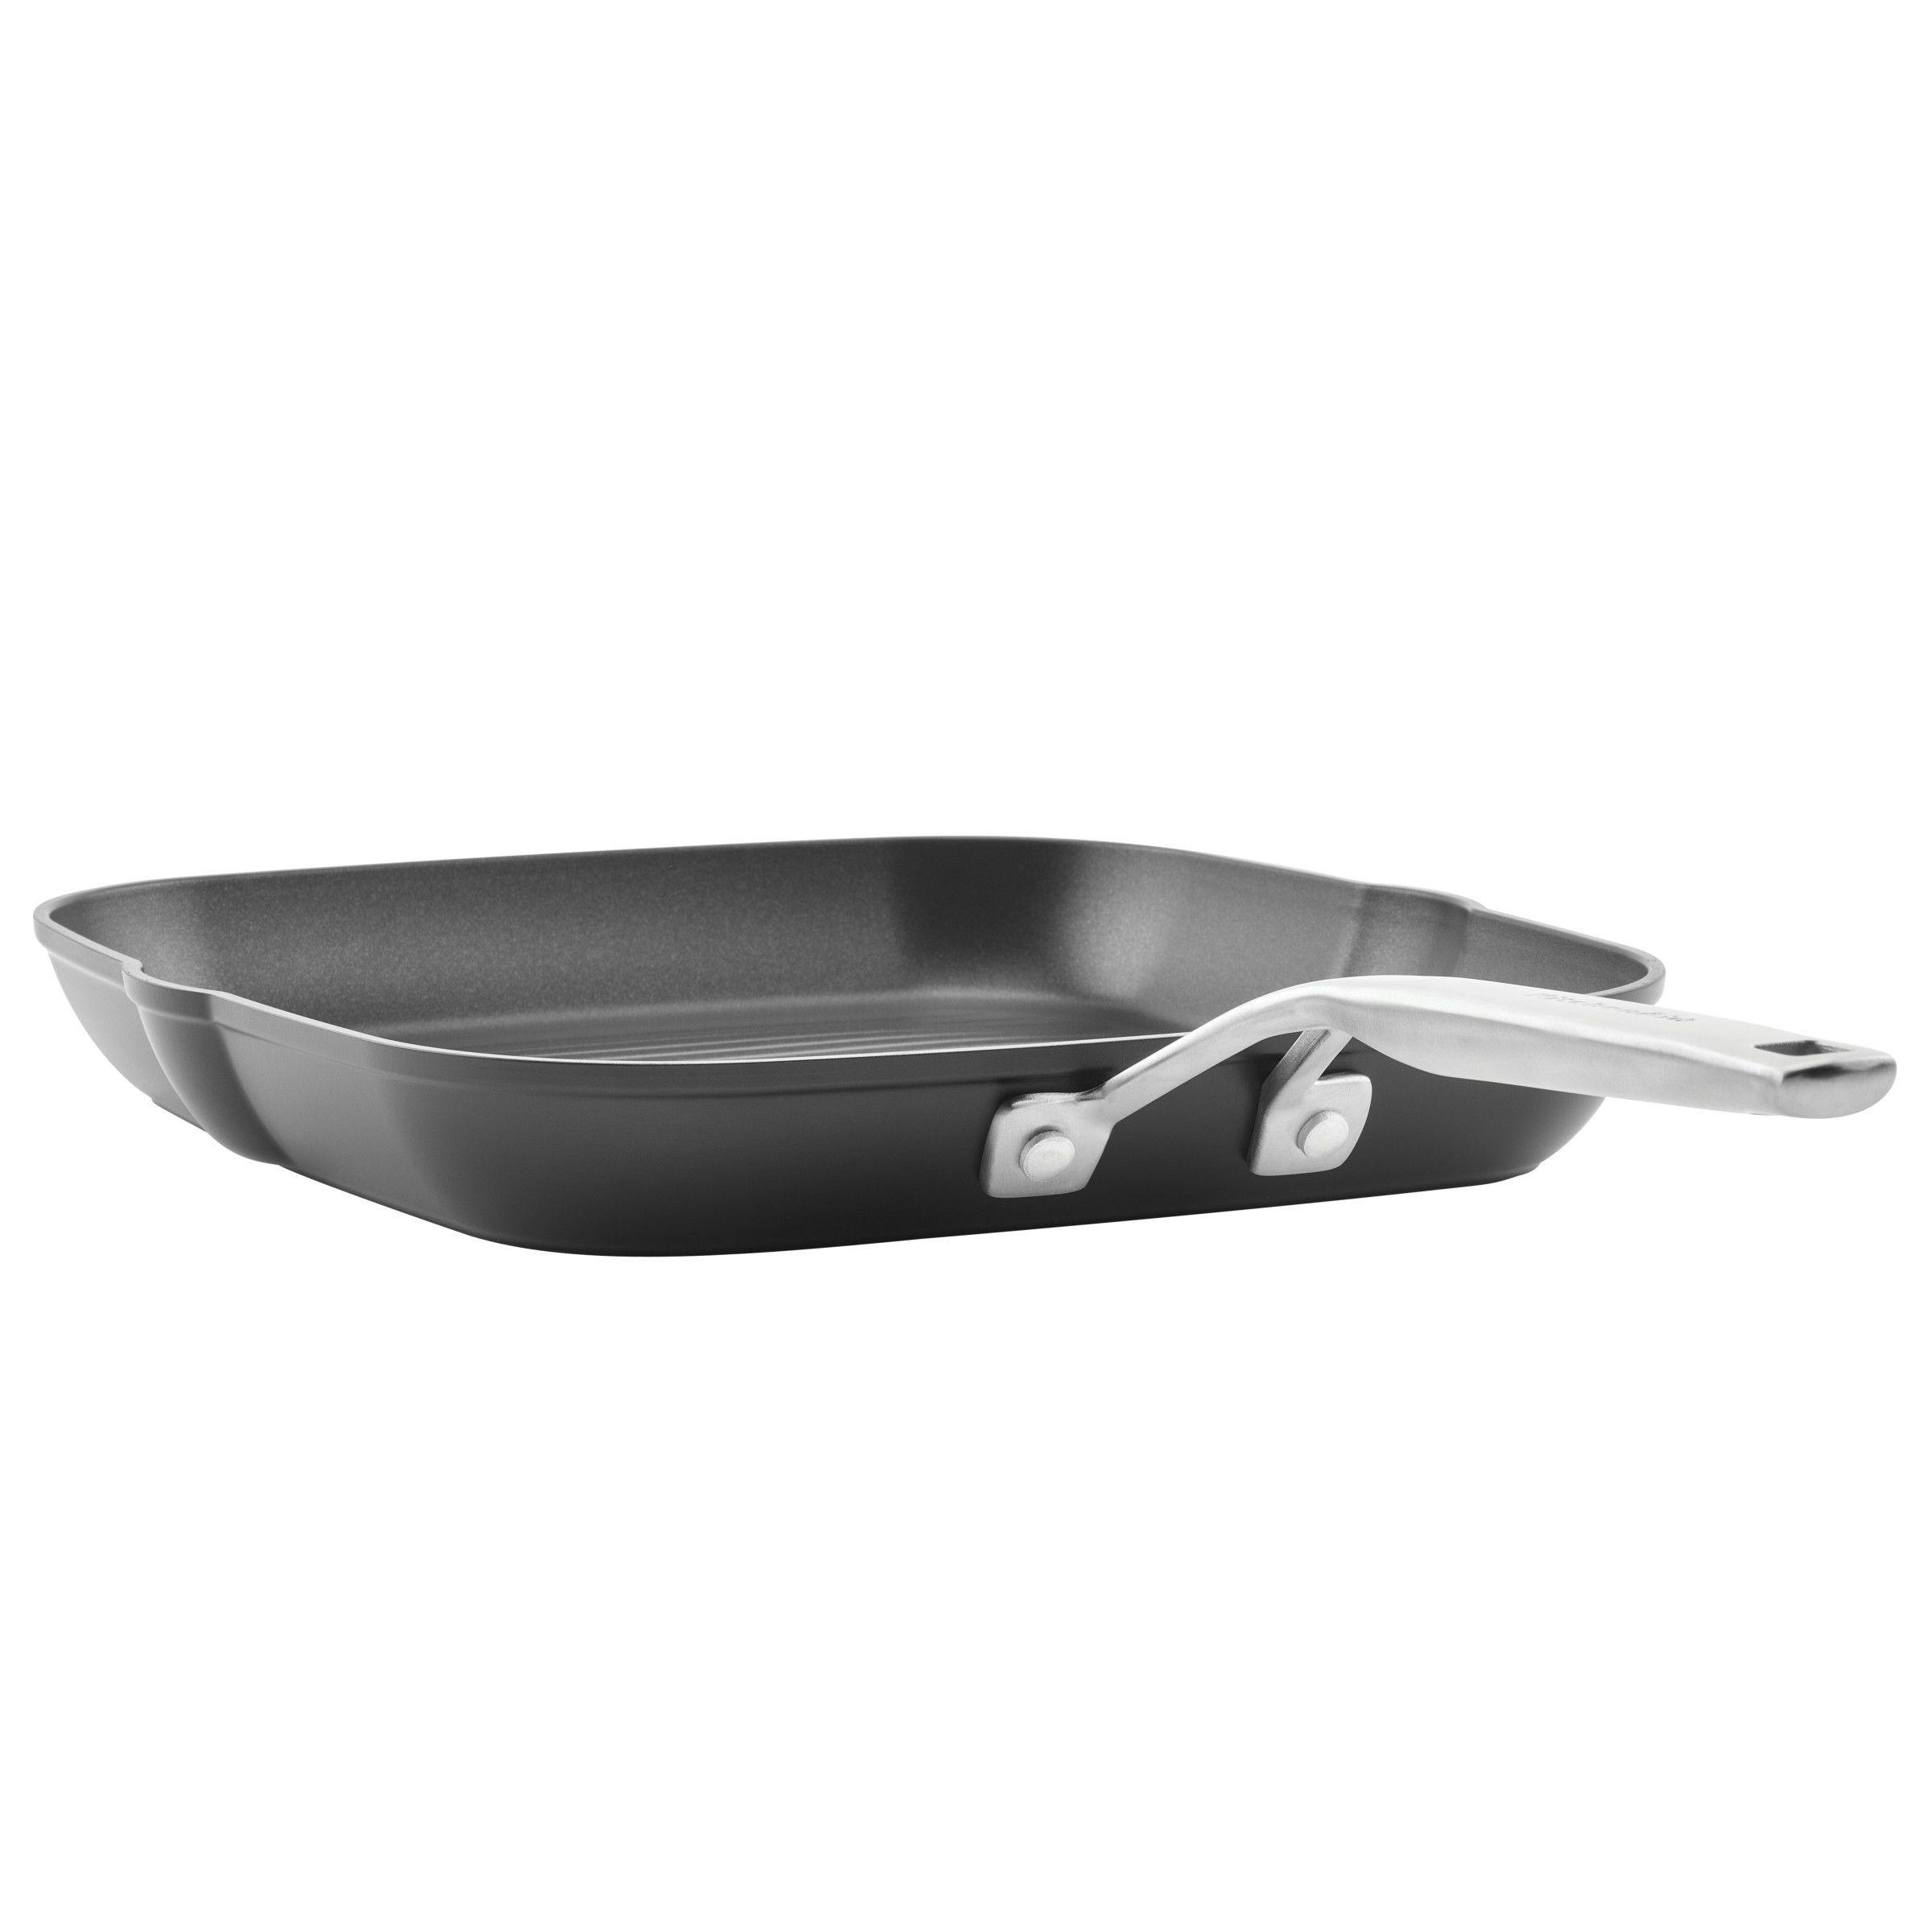 KitchenAid Hard-Anodized Induction Nonstick Square Grill Pan, 11.25-Inch, Matte Black